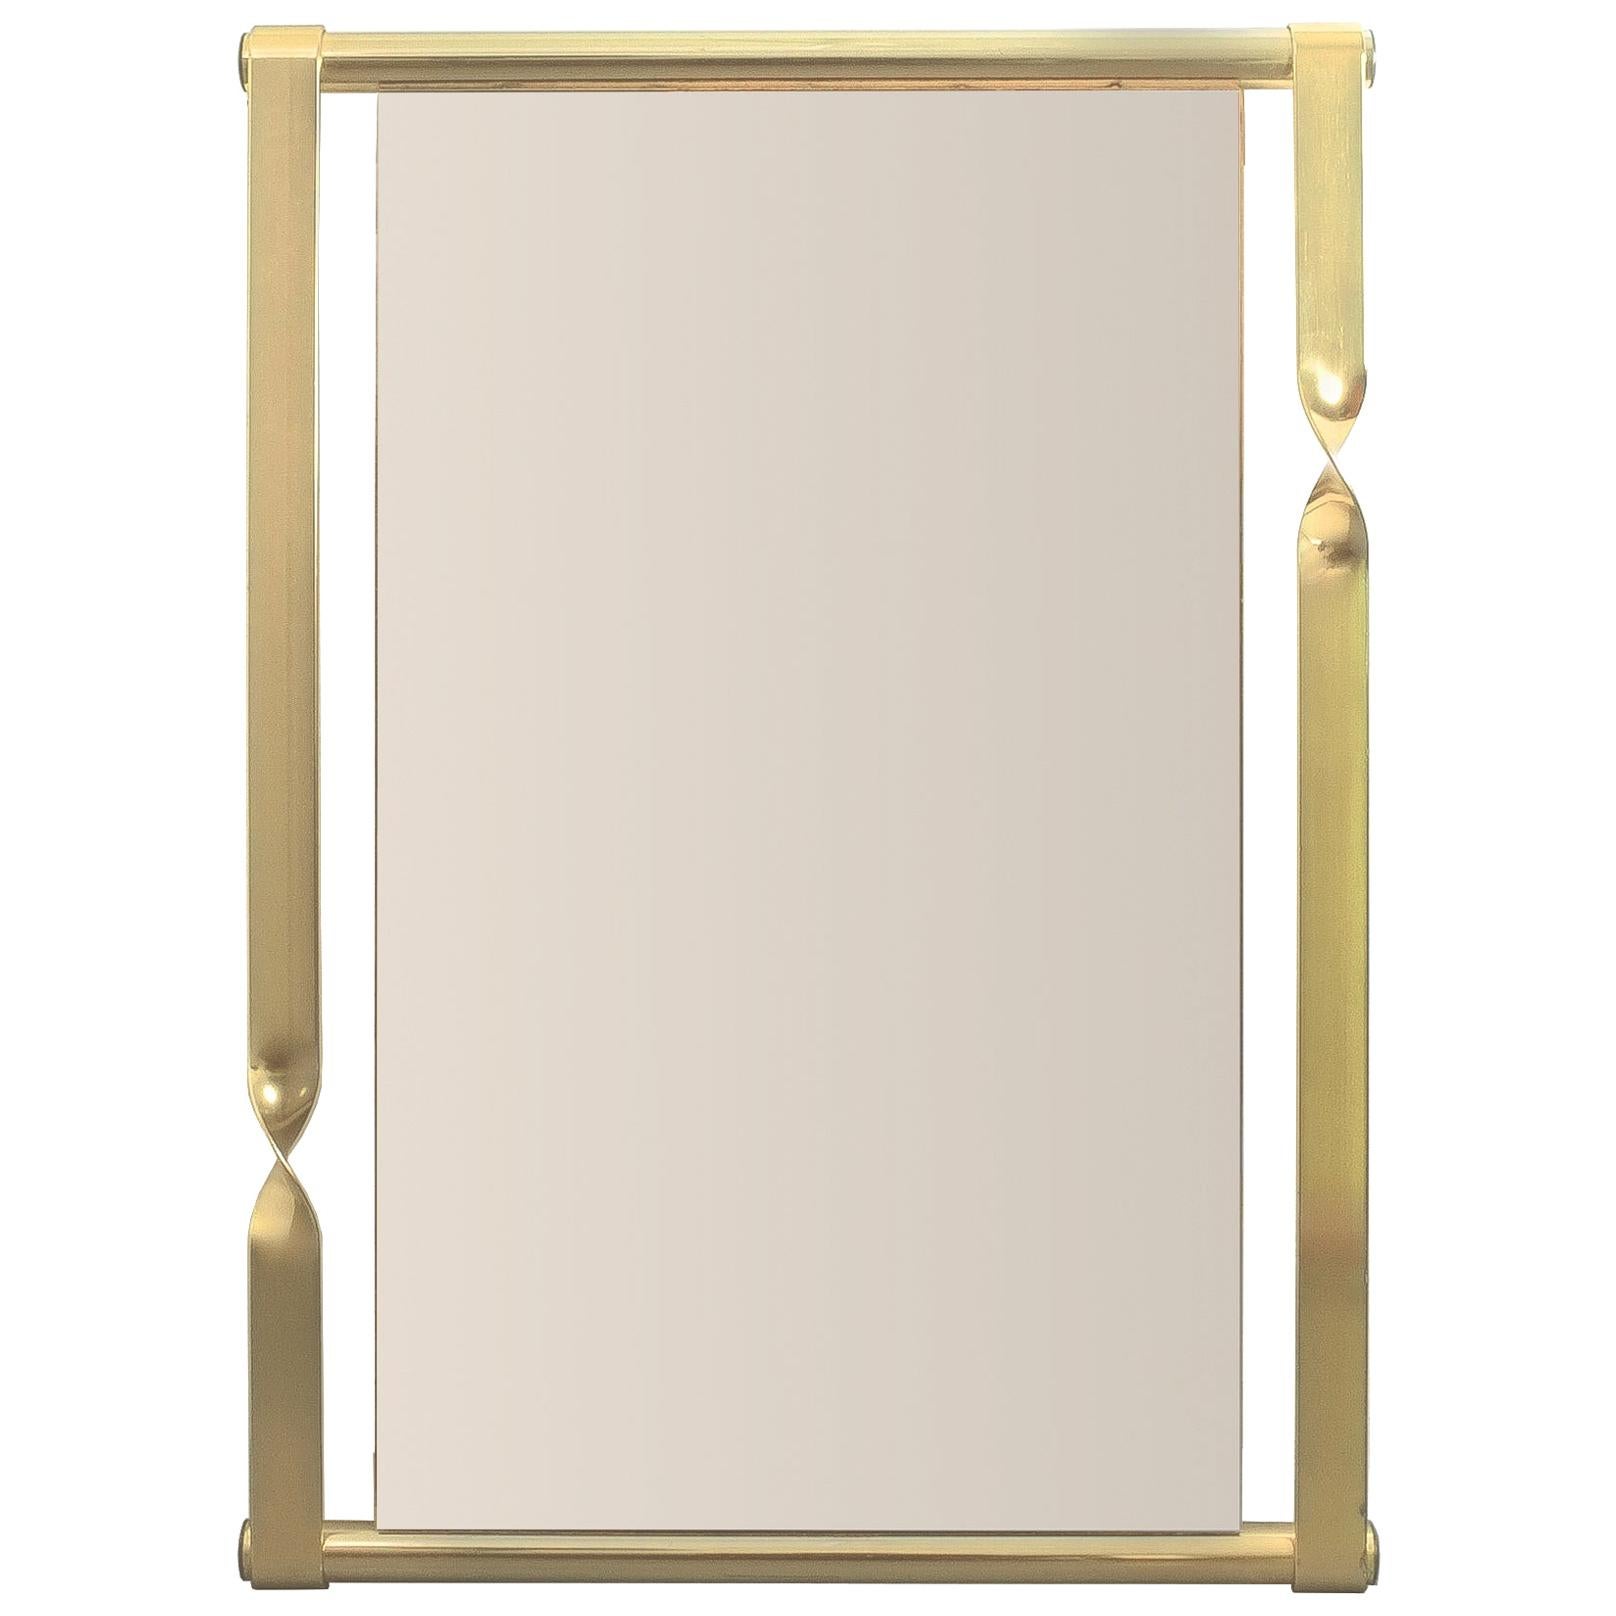 Luciano Frigerio Midcentury Mirror with Golden Twisted Frame, Italy, circa 1965 For Sale